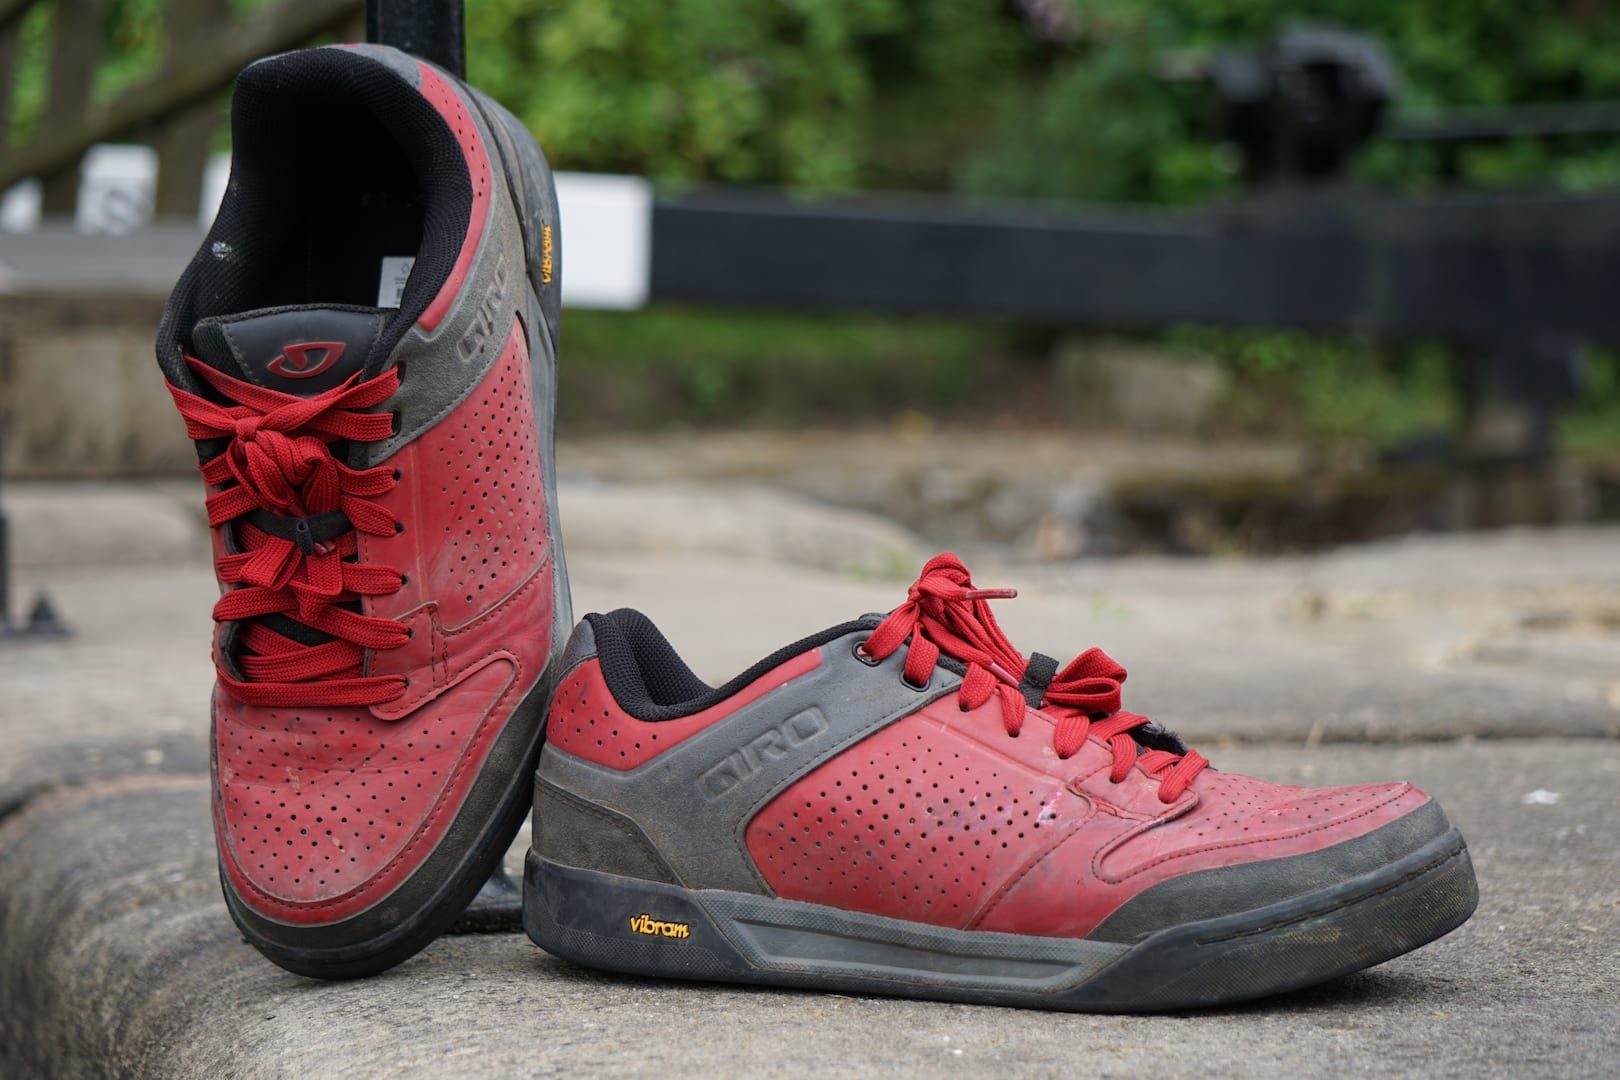 Review: The Giro Riddance flat pedal shoe uses a Vibram Megagrip sole for # ...